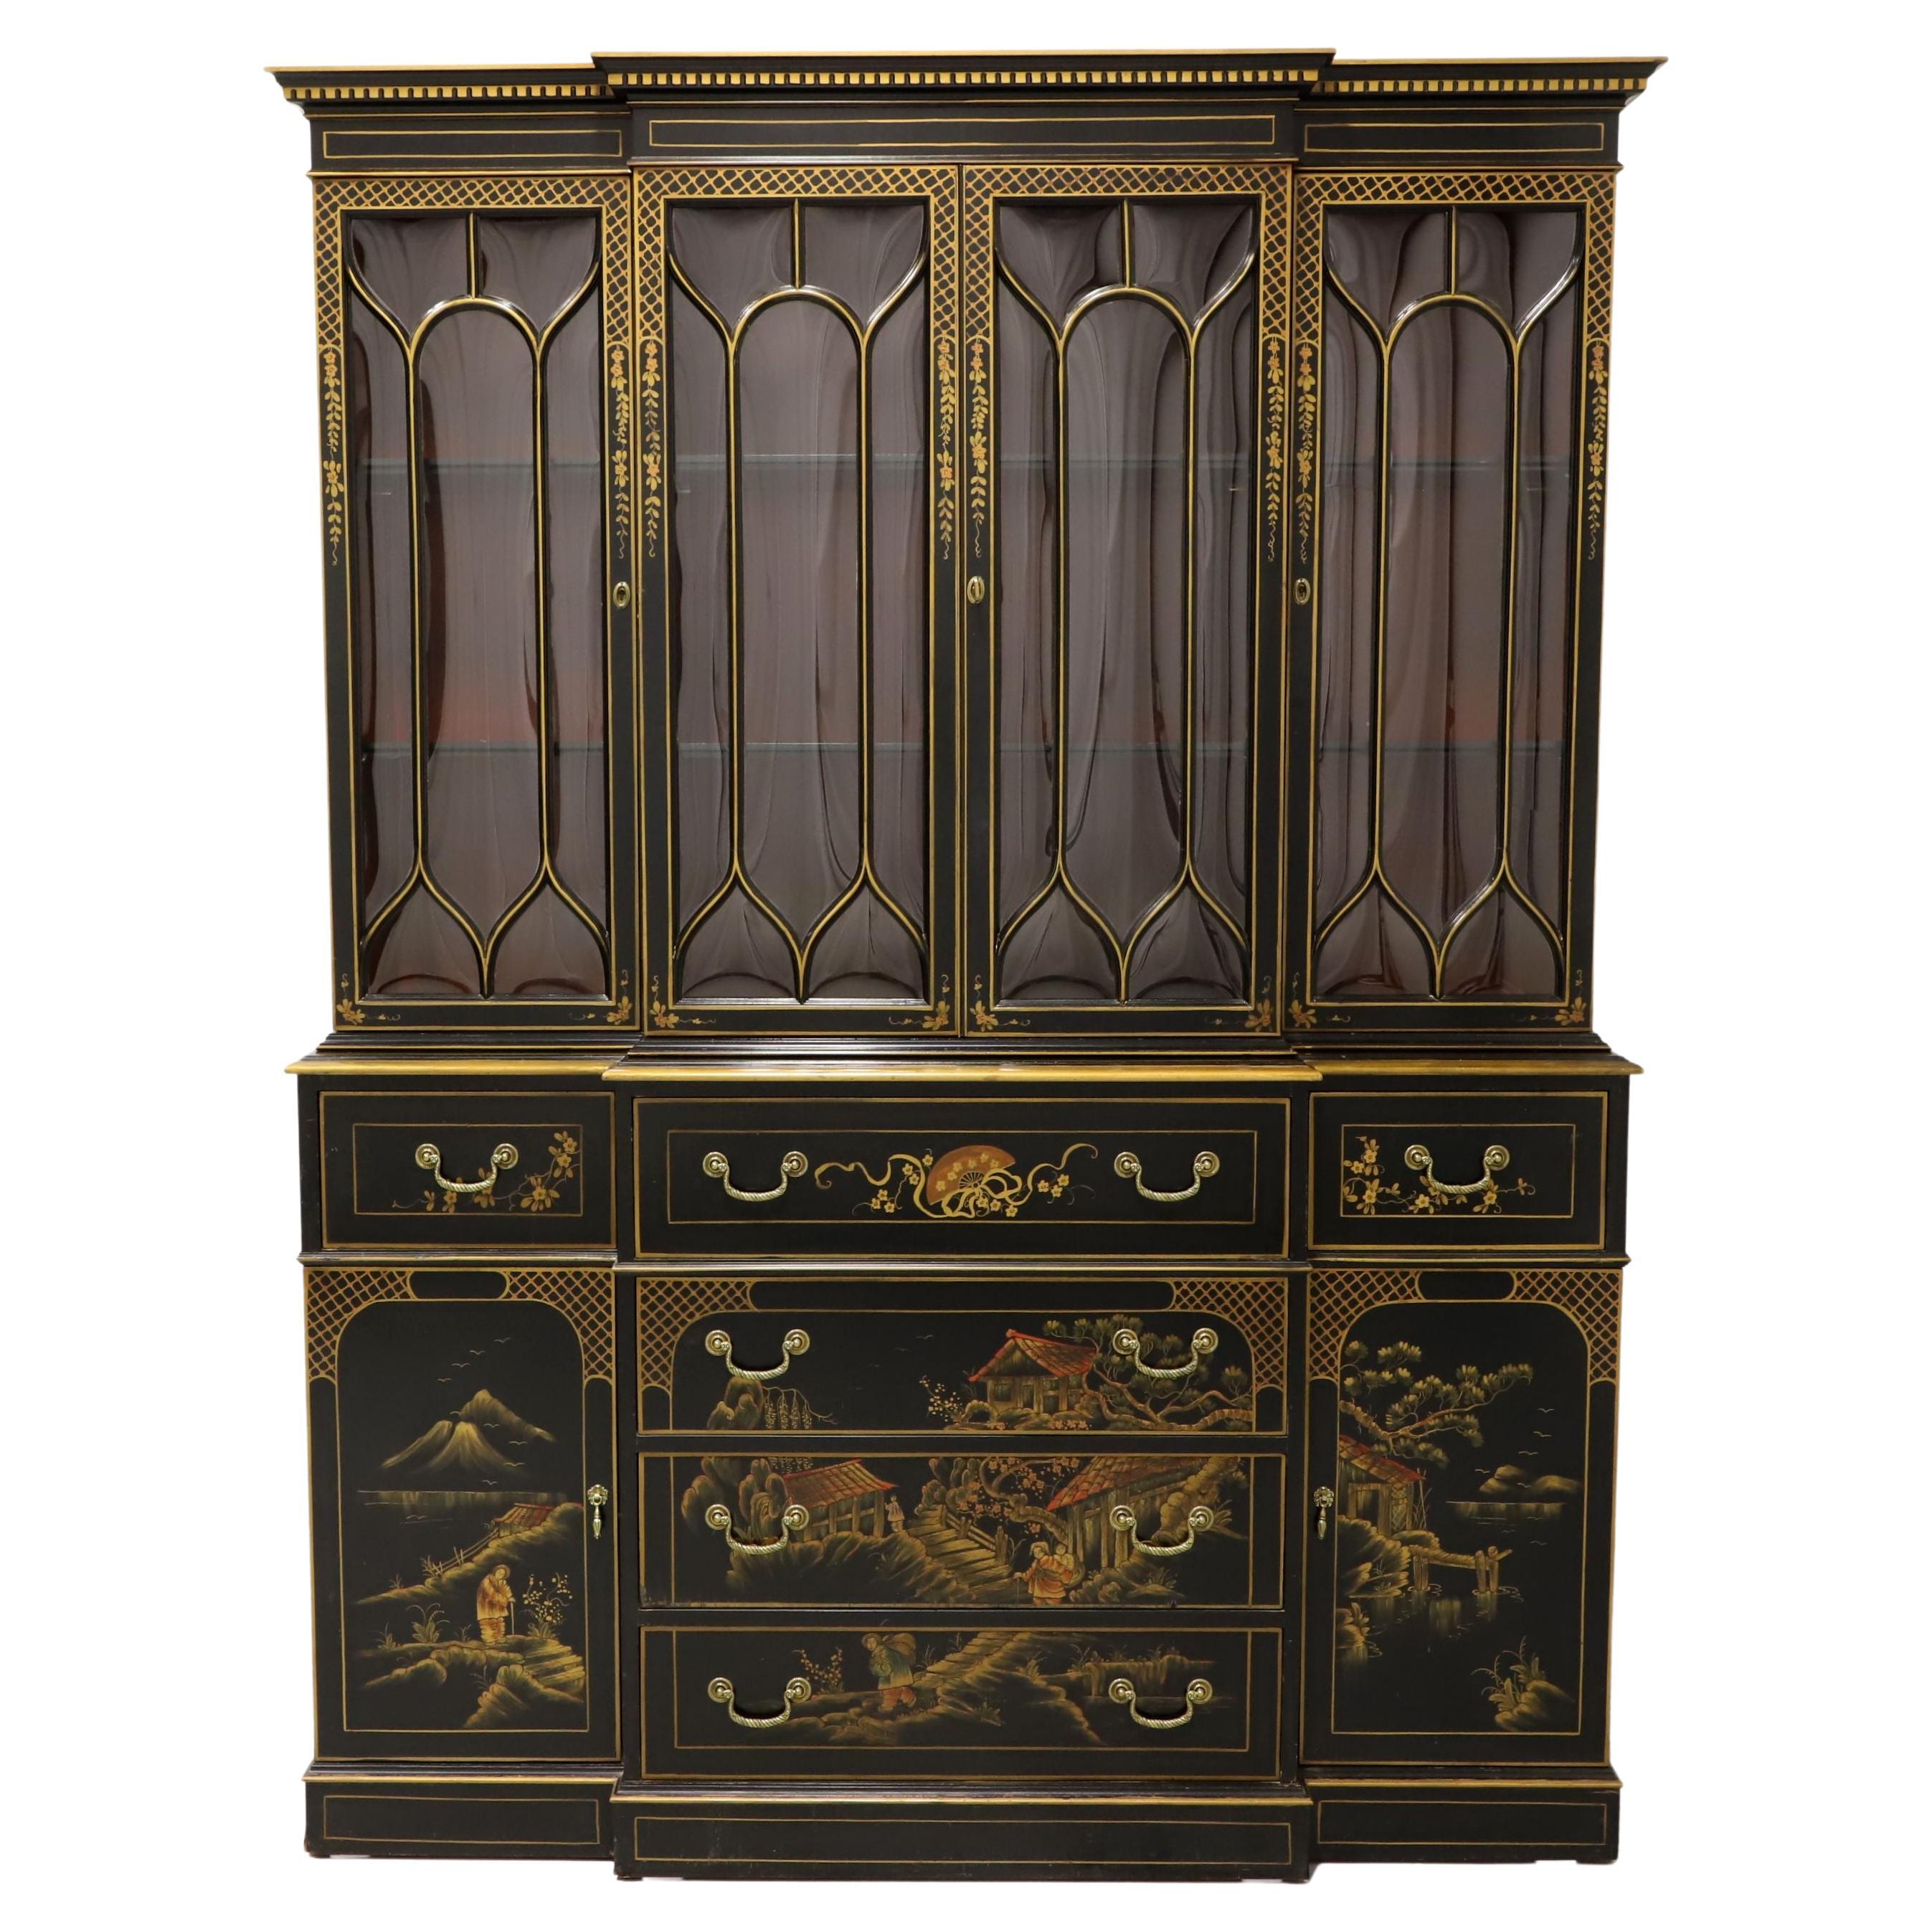 UNION-NATIONAL Chinoiserie Hand Painted Breakfront Secretary Desk China Cabinet